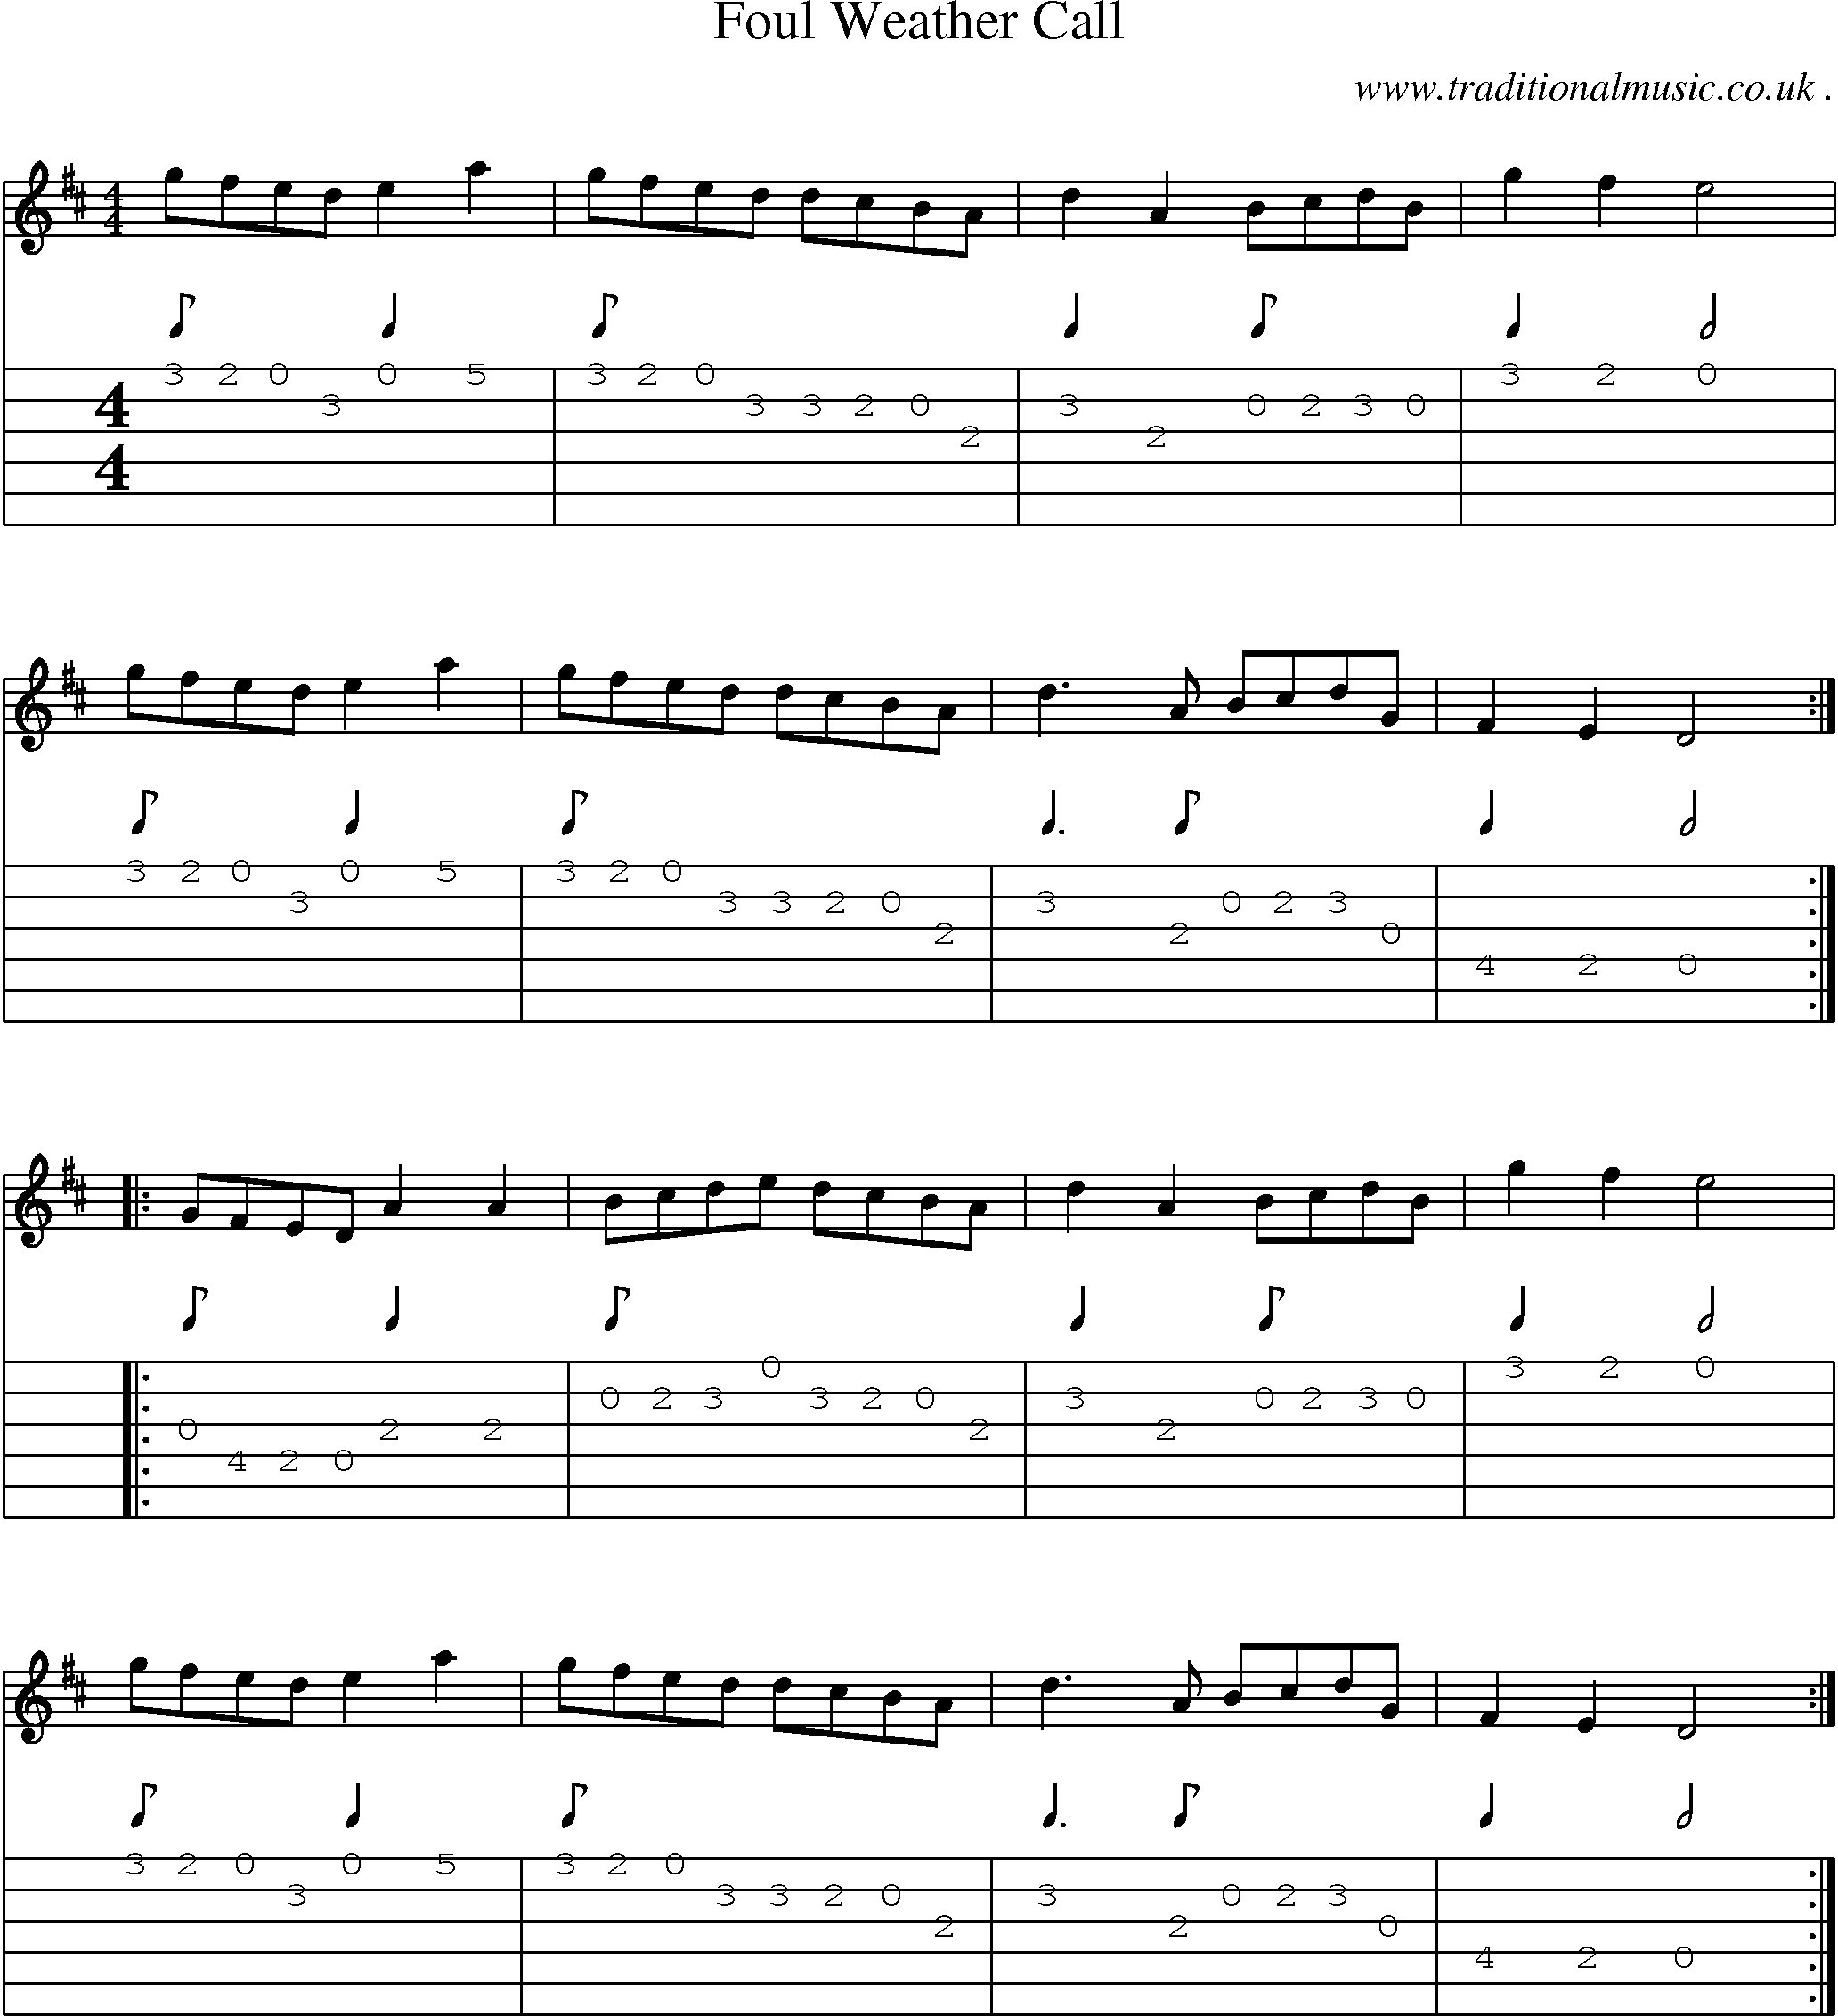 Sheet-Music and Guitar Tabs for Foul Weather Call